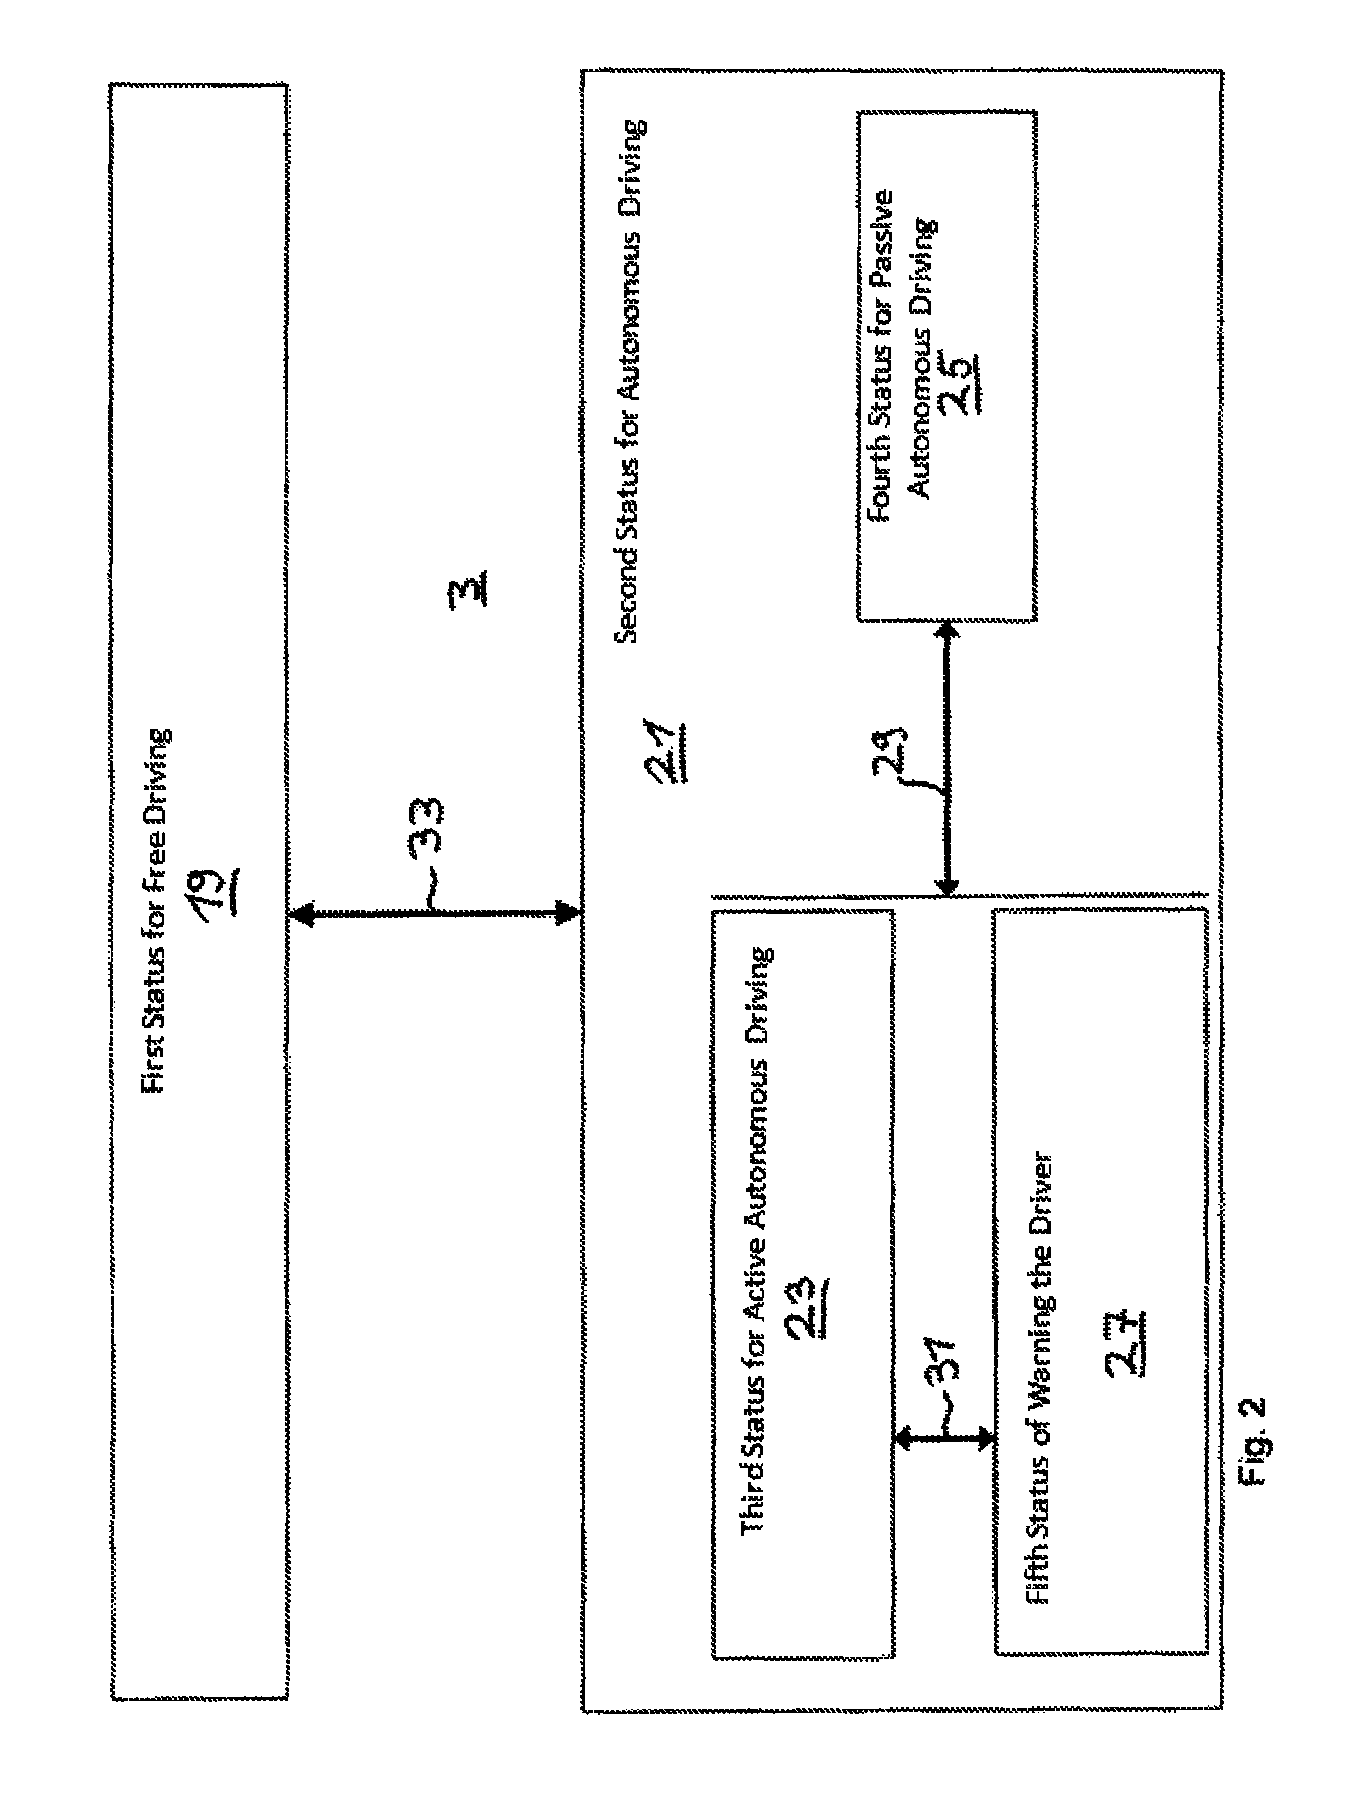 Method and device for automatically operating a vehicle in an autonomous driving mode requiring no user action